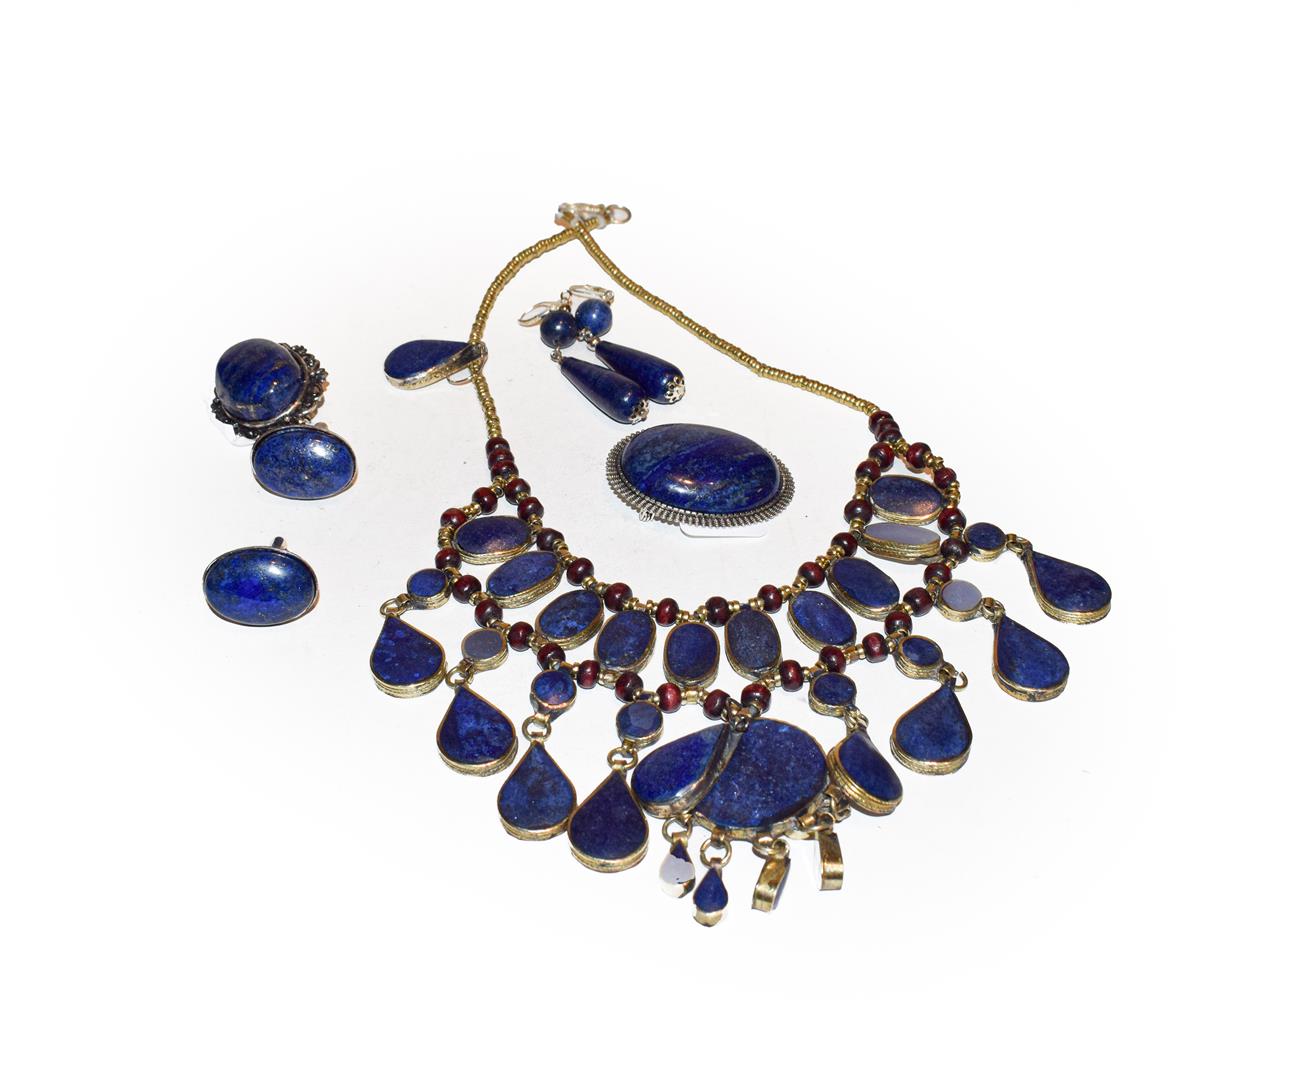 Lot 191 - A group of lapis lazuli type jewellery including a cabochon brooch together with a pair of drop...